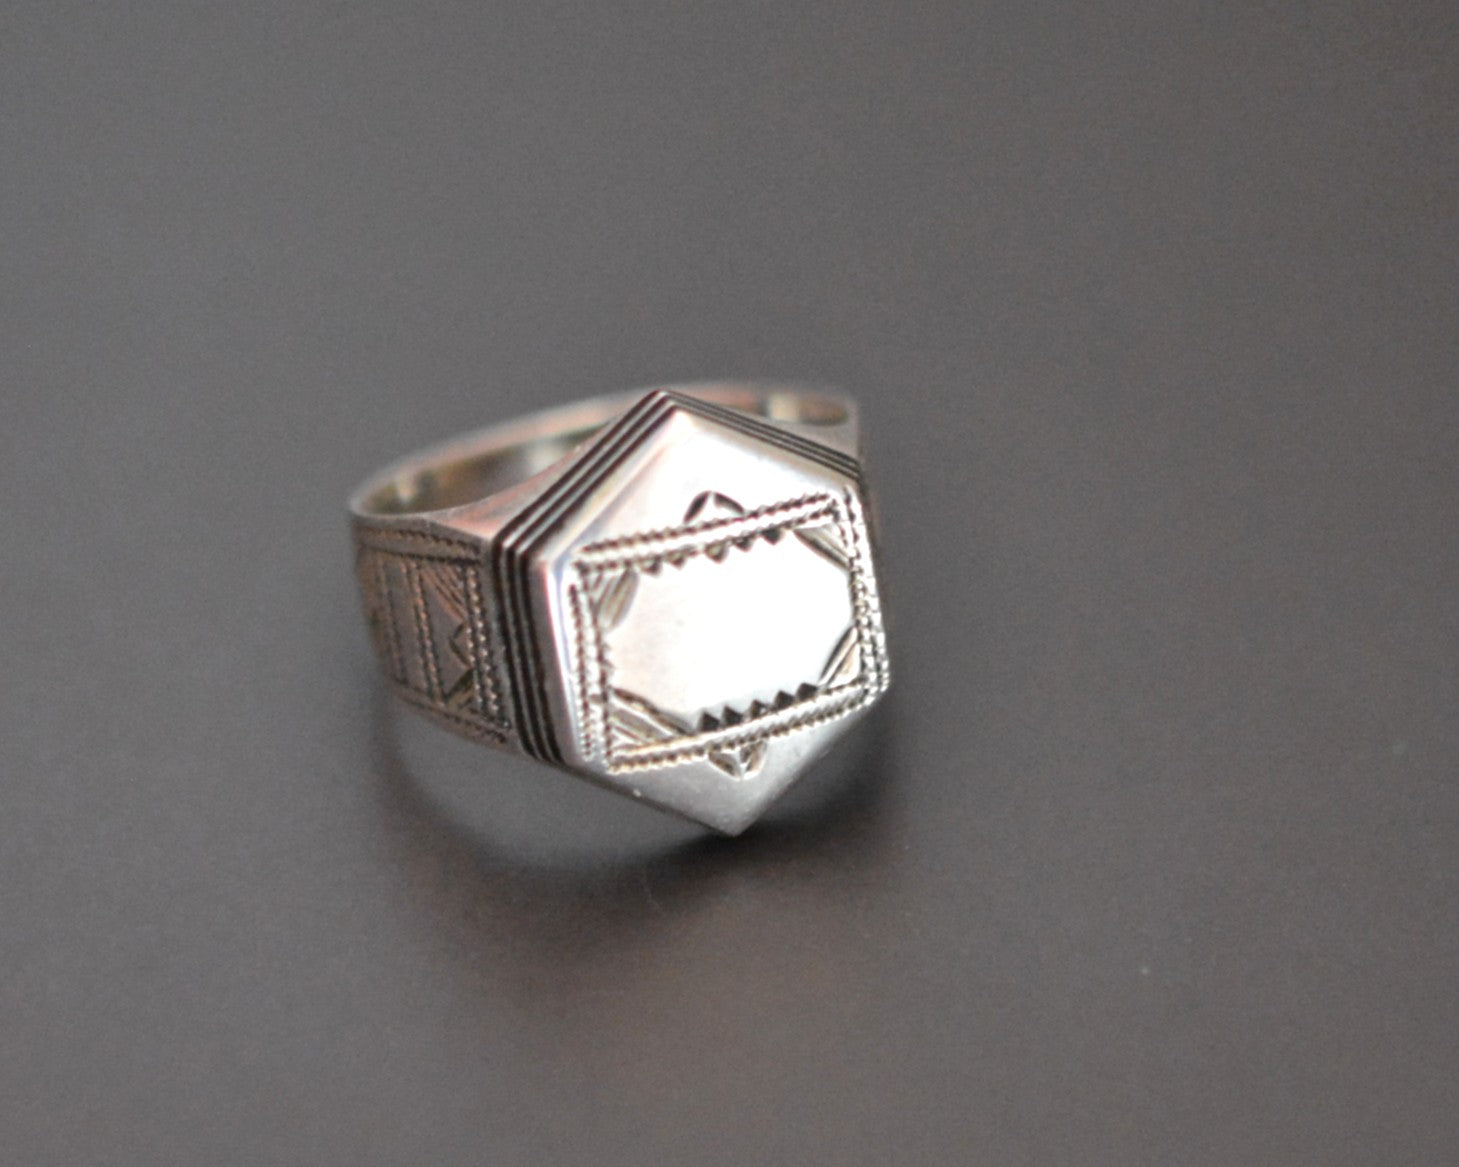 Tuareg Ring with Carvings and Ebony Inlay